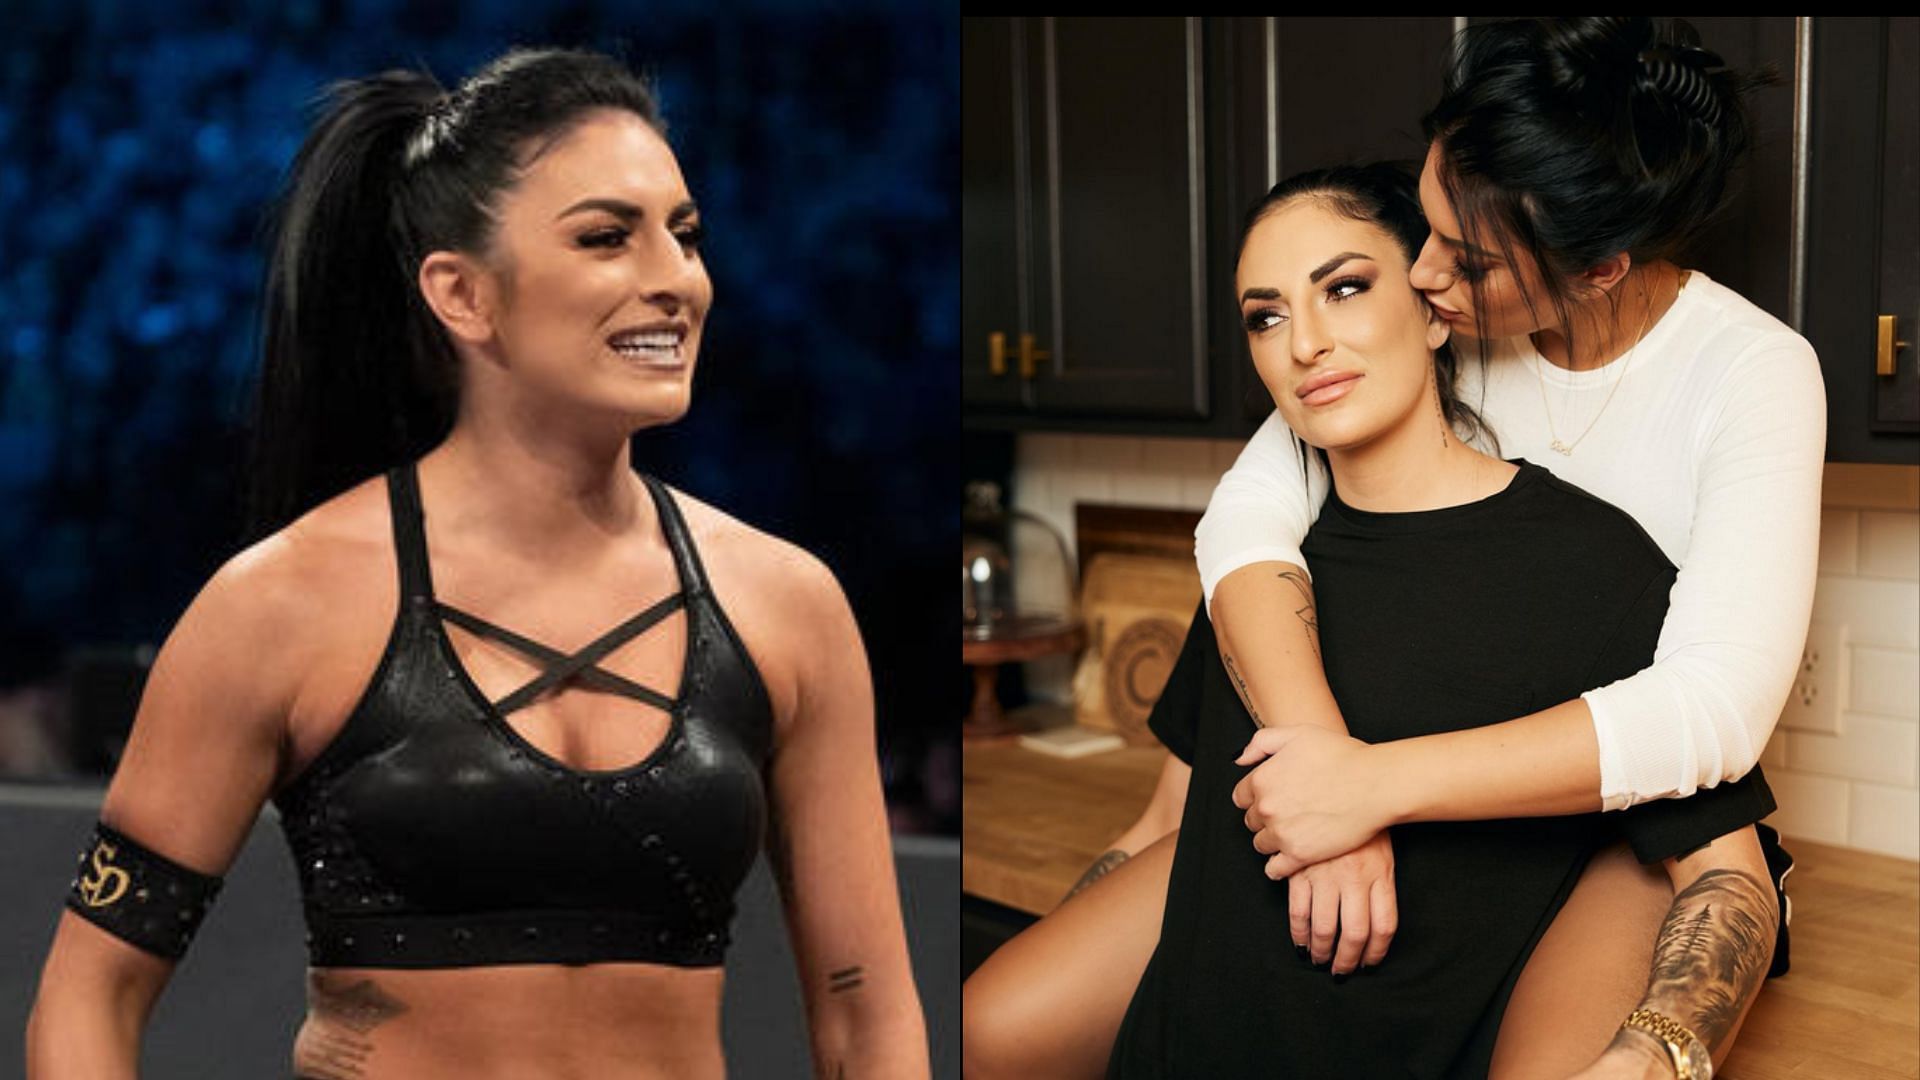 Sonya Deville is engaged to longtime girlfriend Toni Cassano